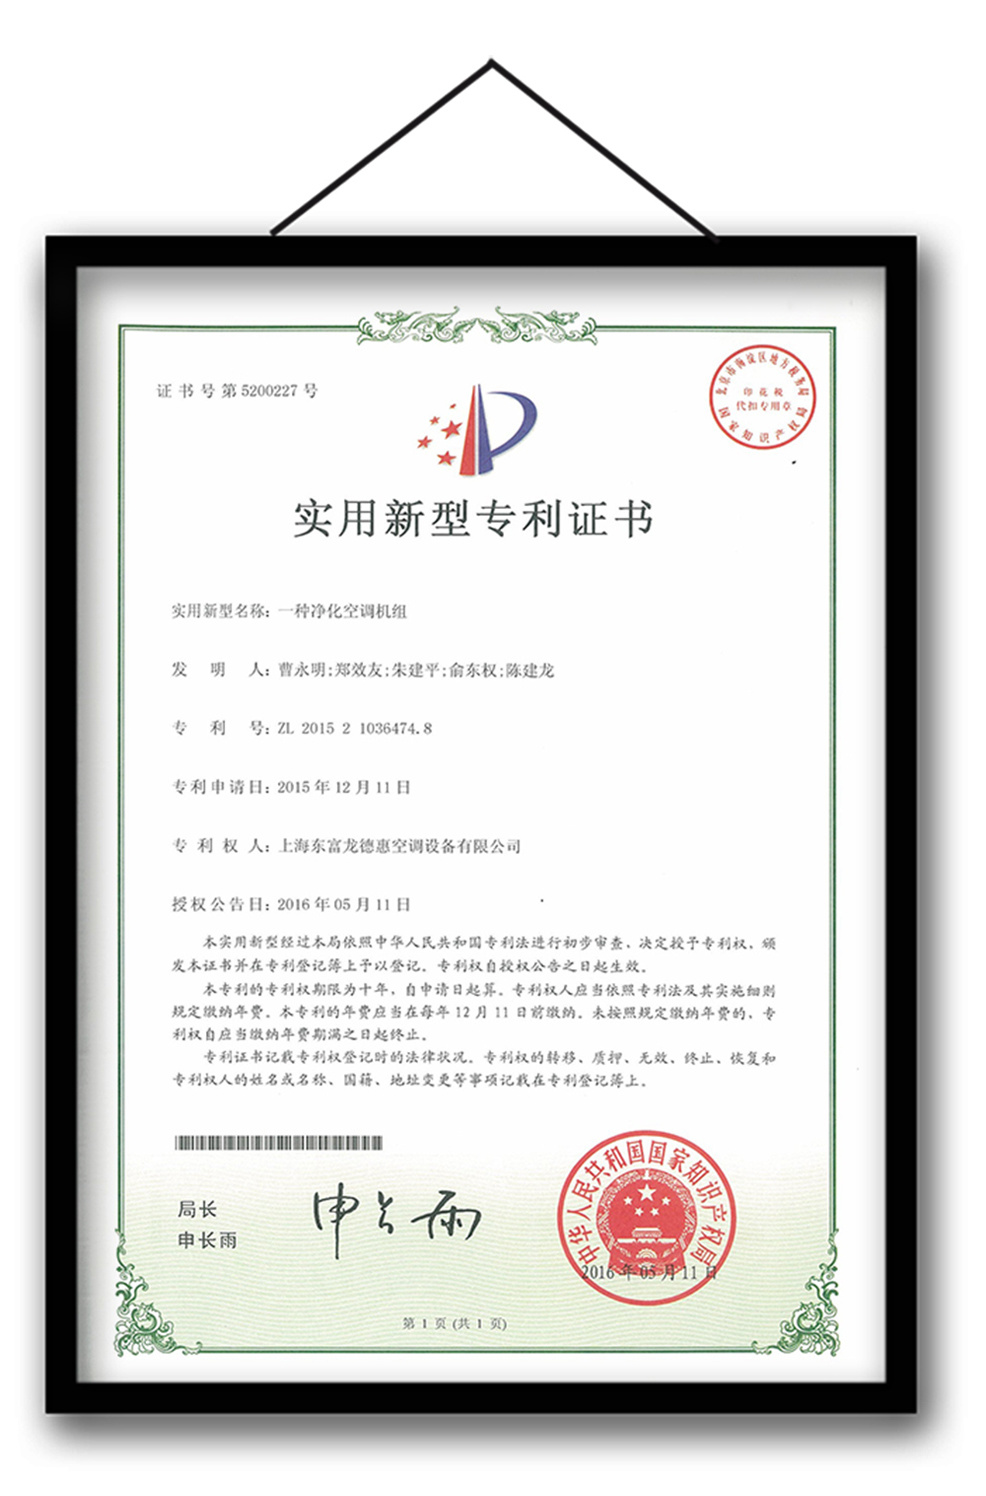 Patent certificate for purification air conditioning unit